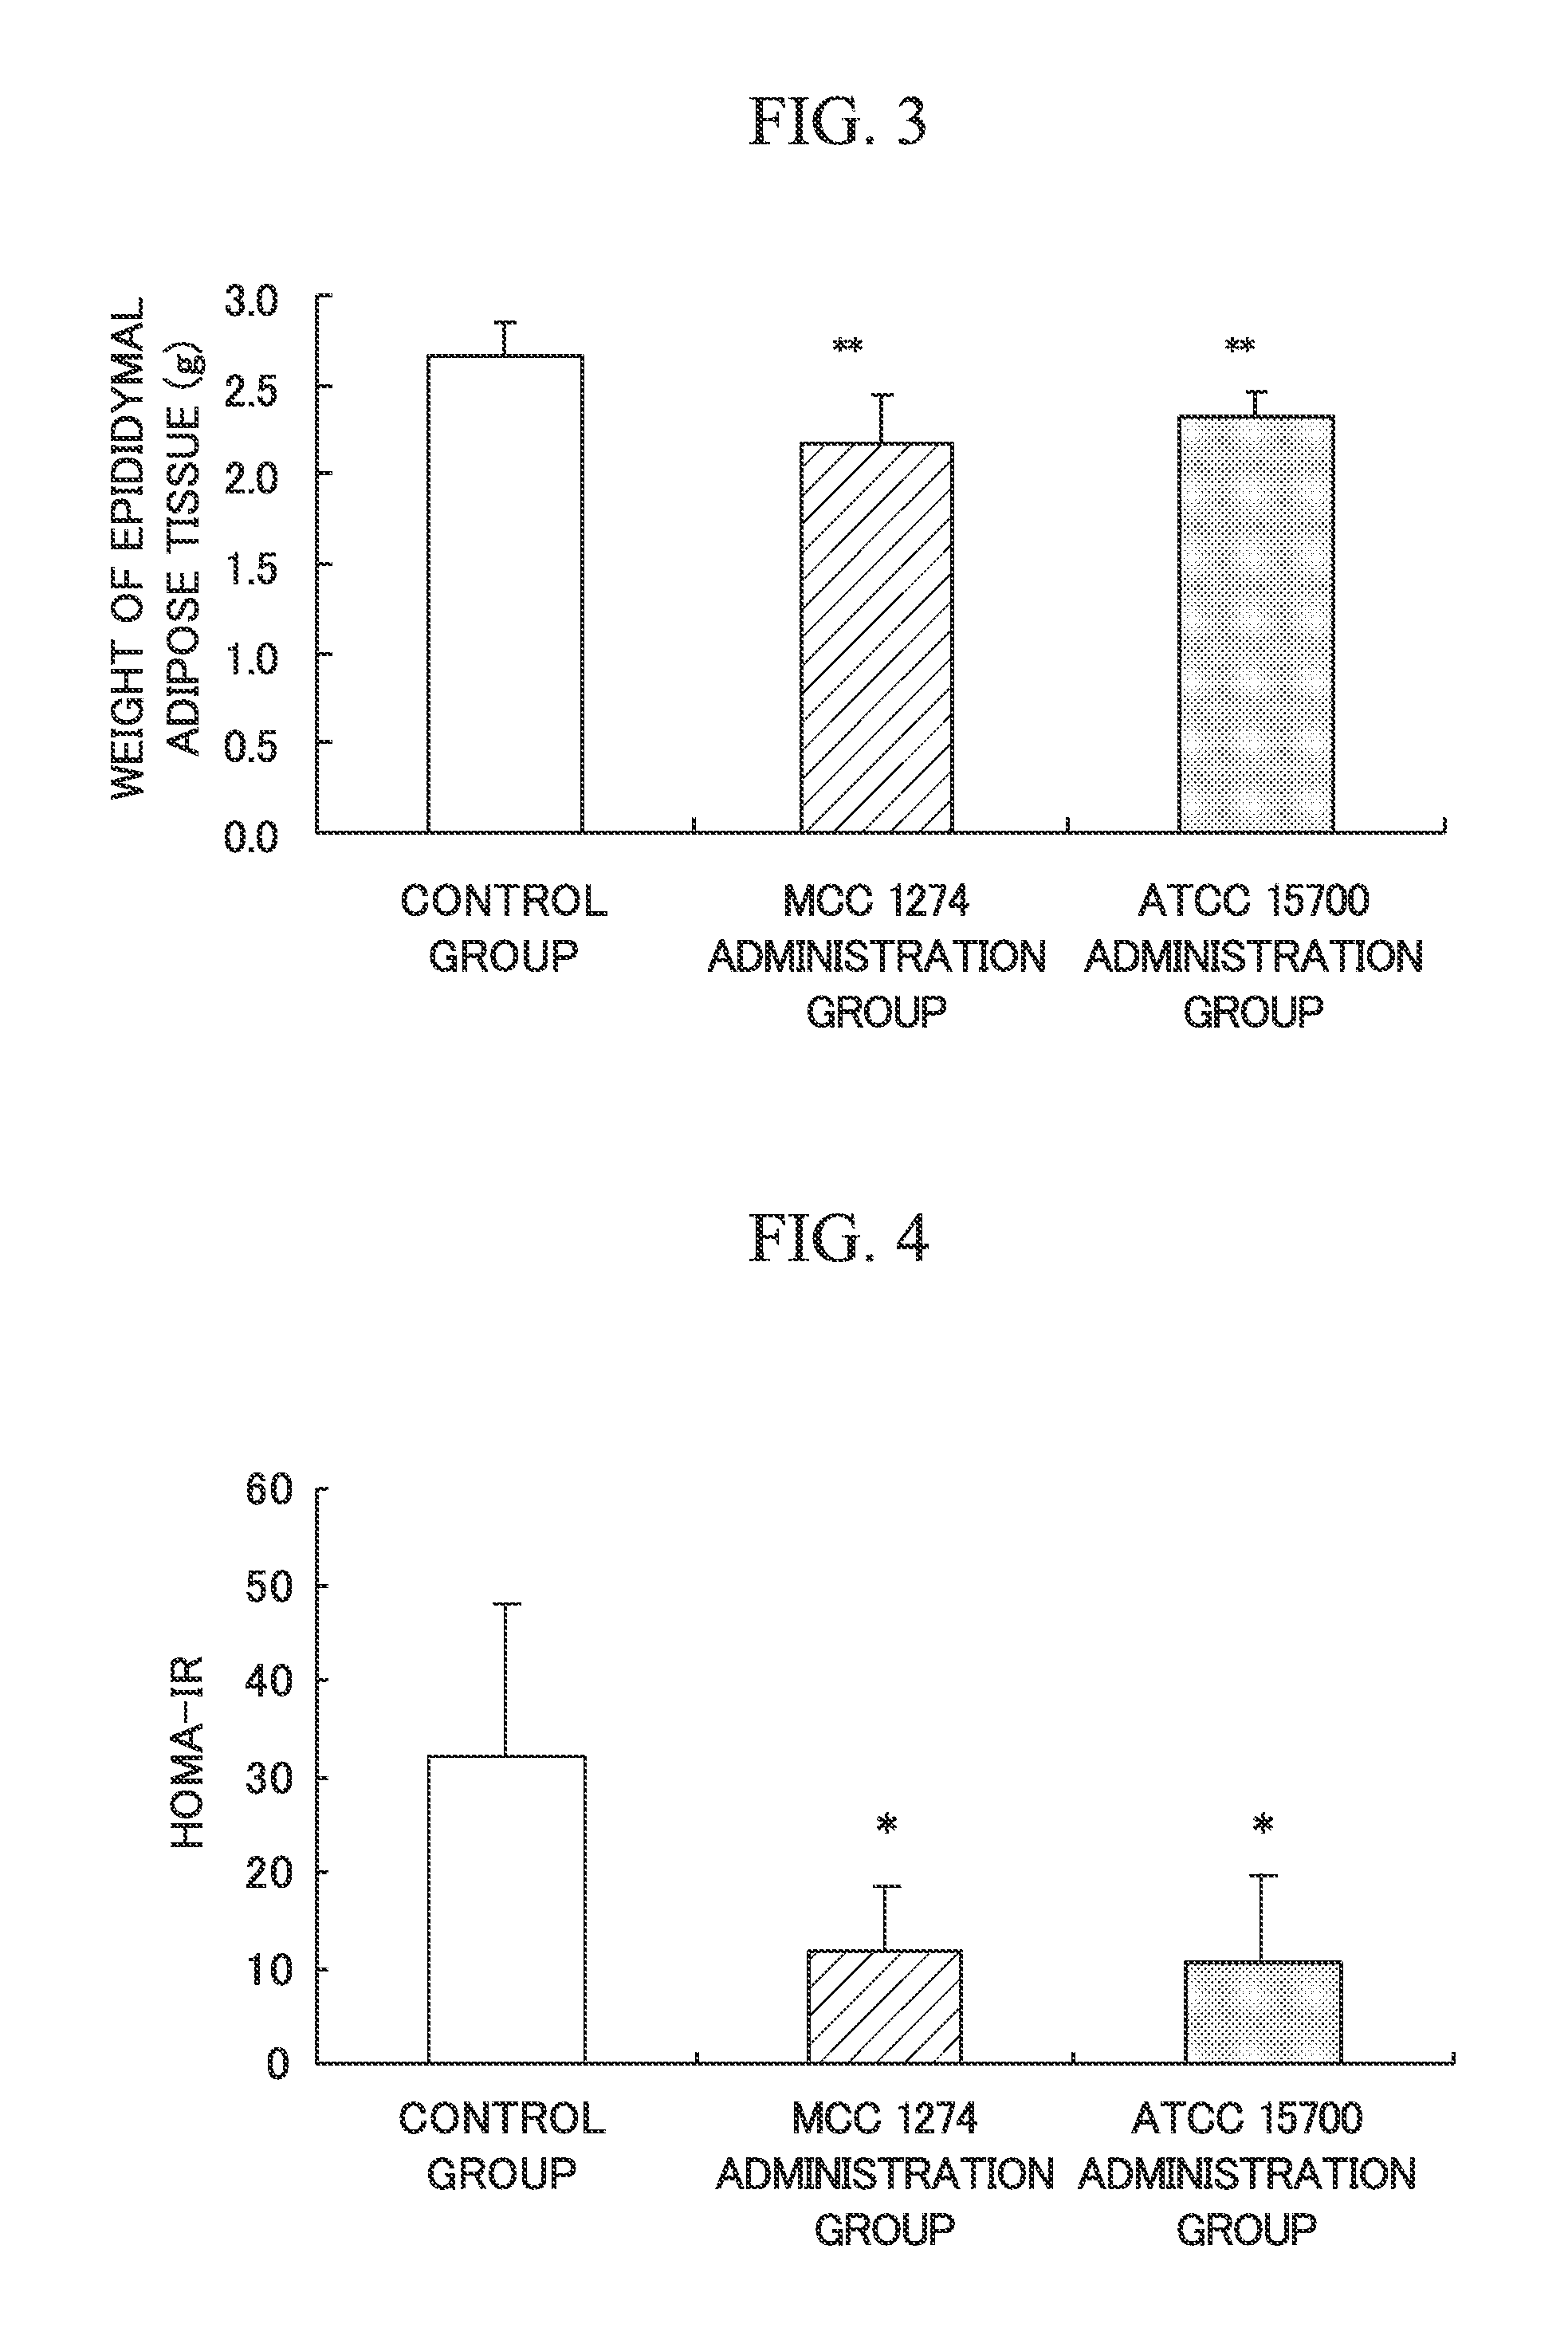 Anti-obesity agent, anti-obesity food or beverage, glucose tolerance-ameliorating agent, and food or beverage for amelioration of glucose tolerance